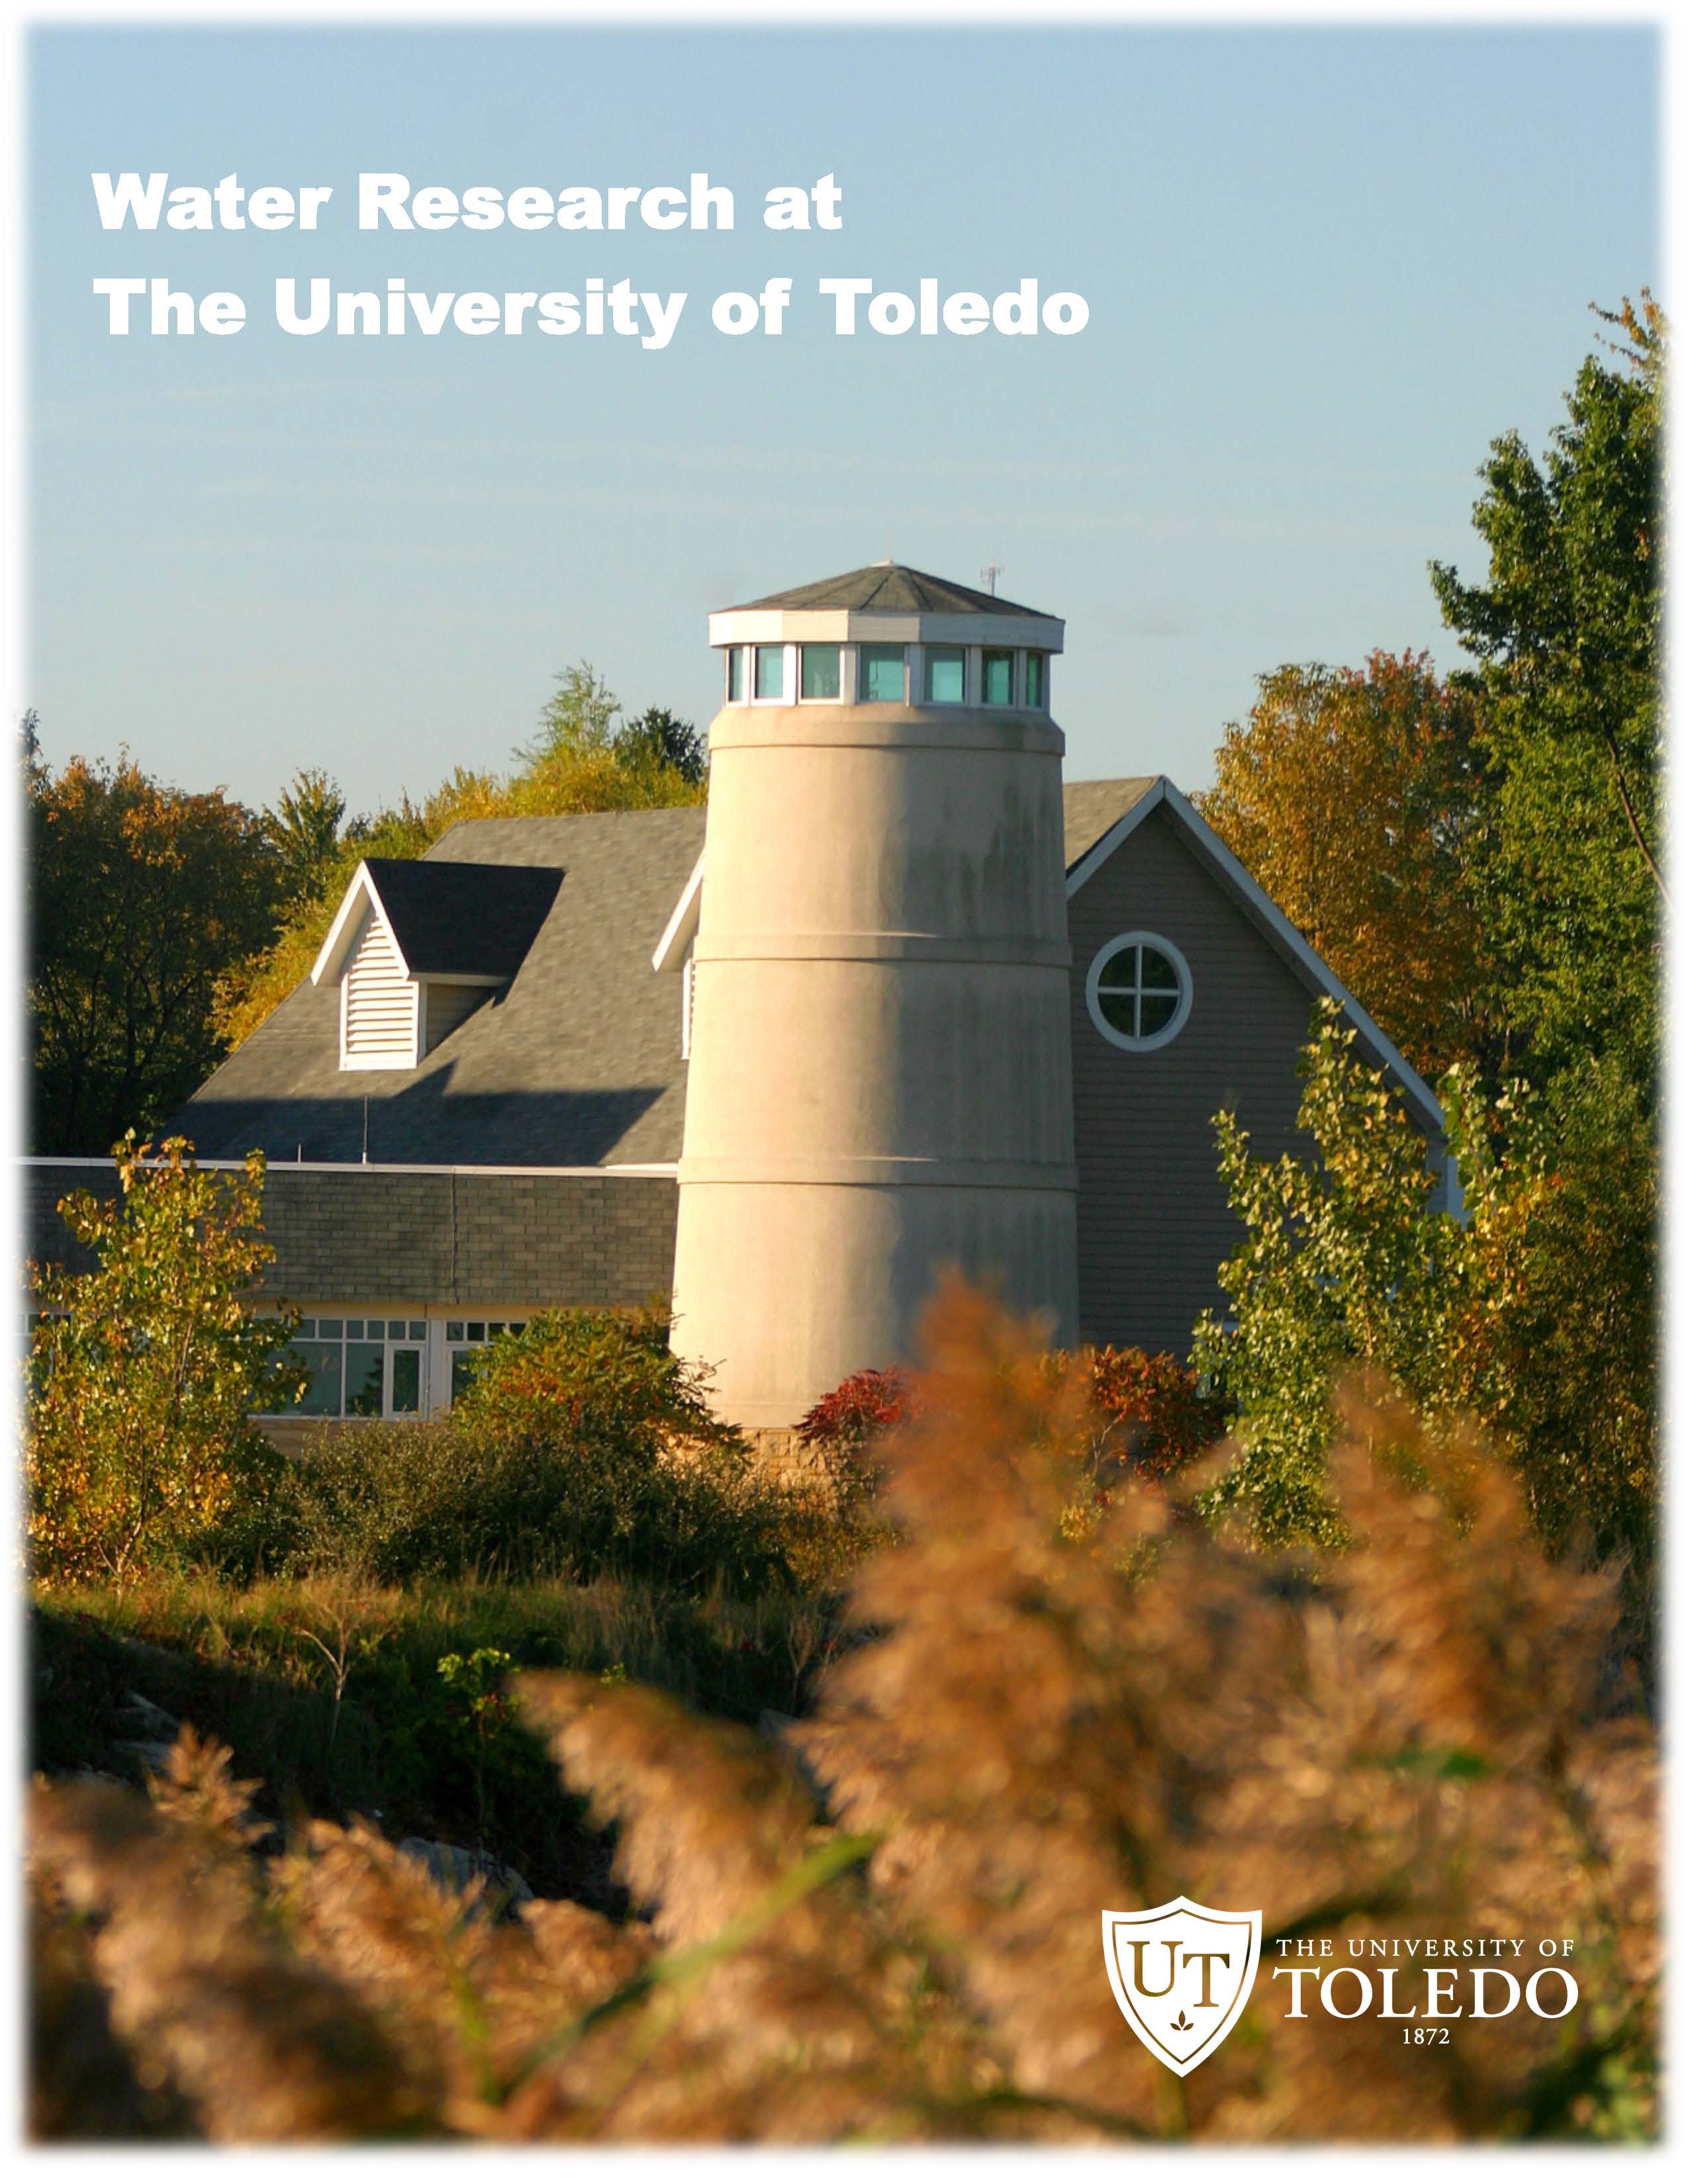 Water Research at The University of Toledo